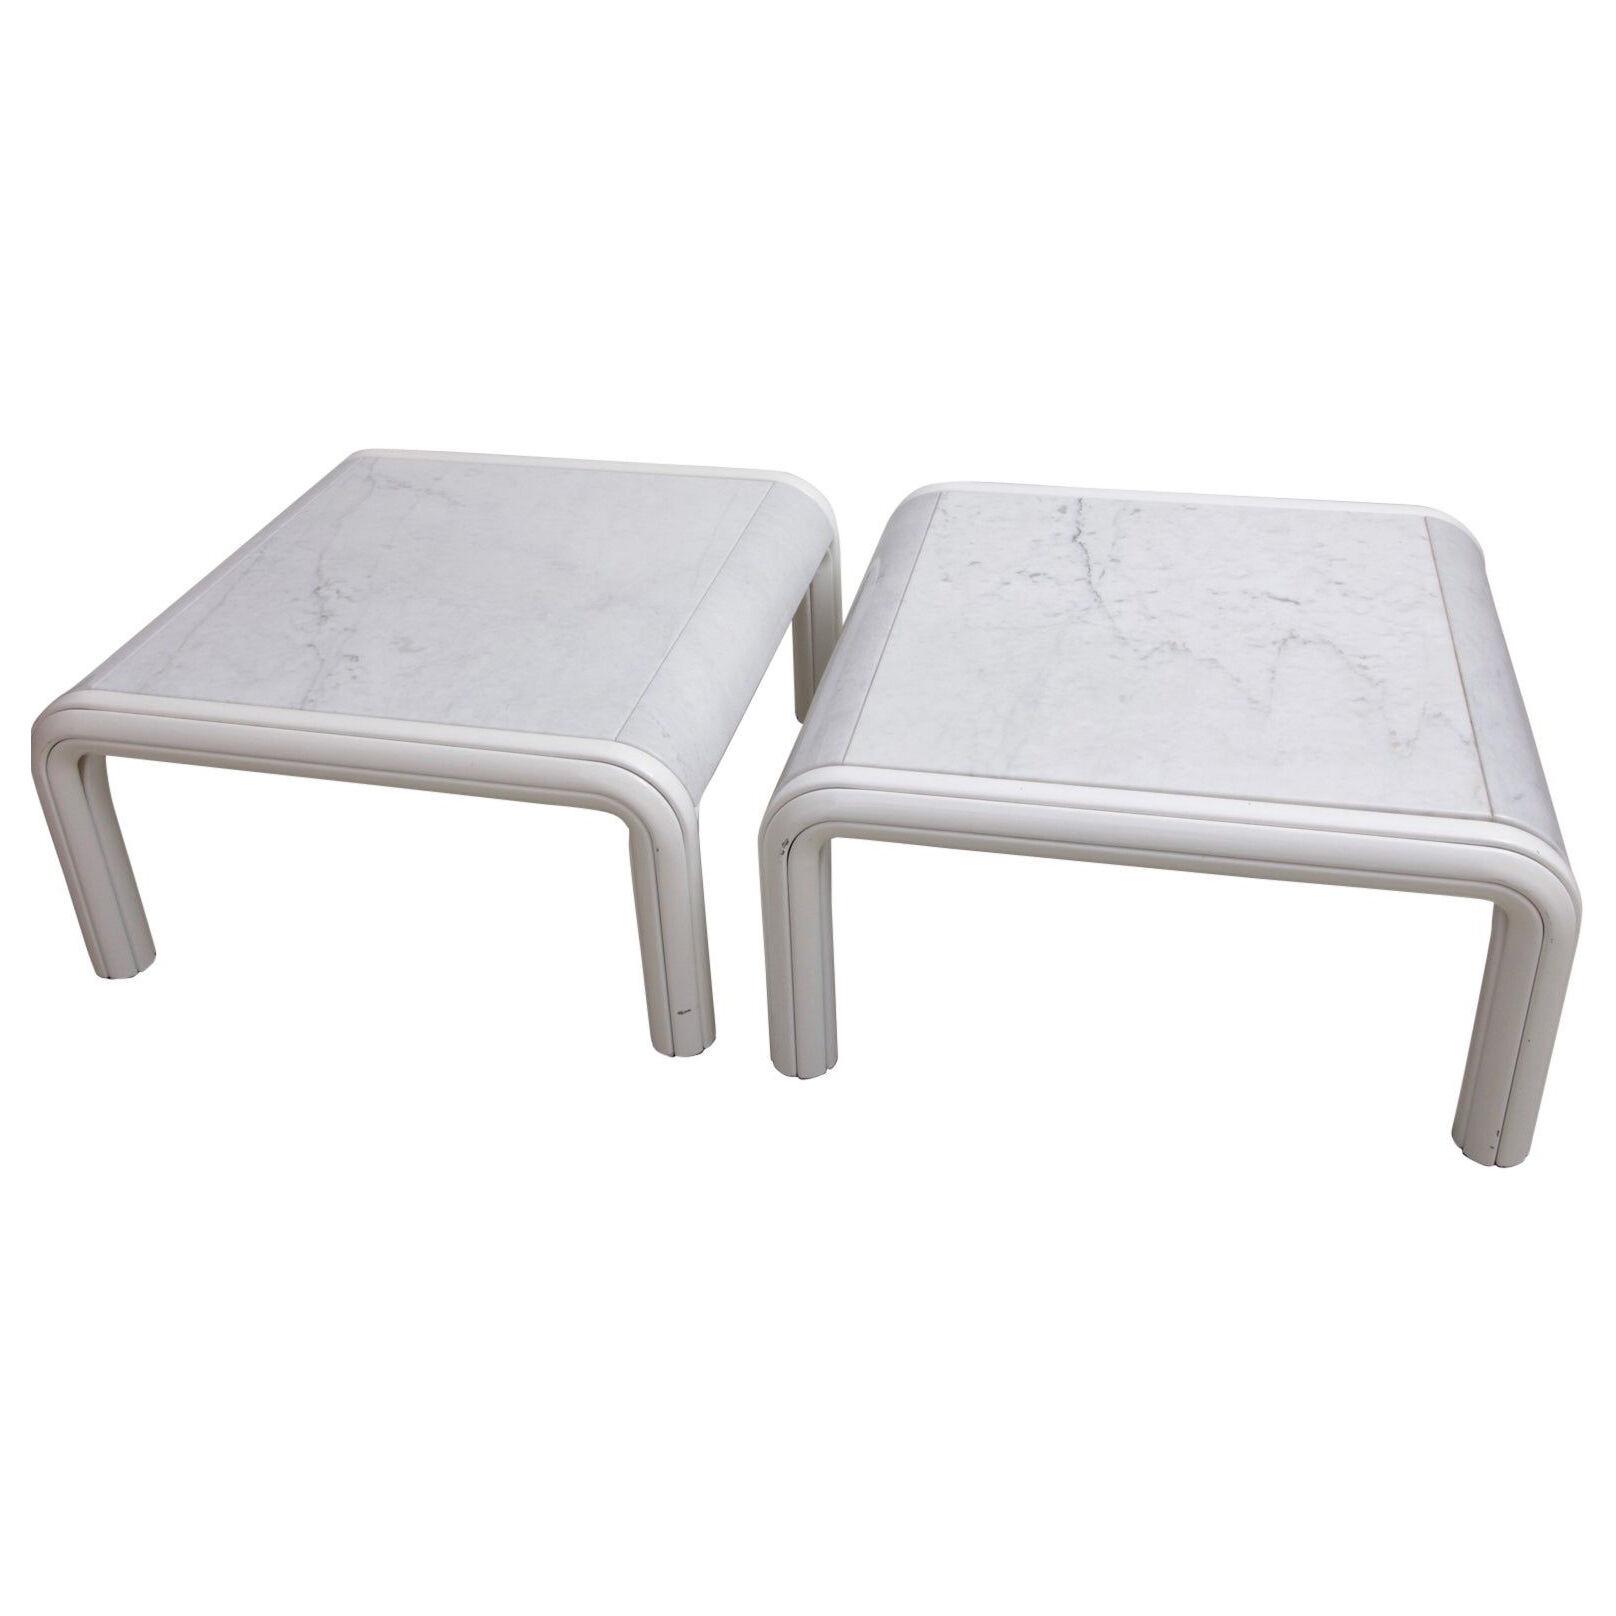 Rare Pair of Marble Coffee or Sofa Tables by Gae Aulenti for Knoll, Italy, 1970s